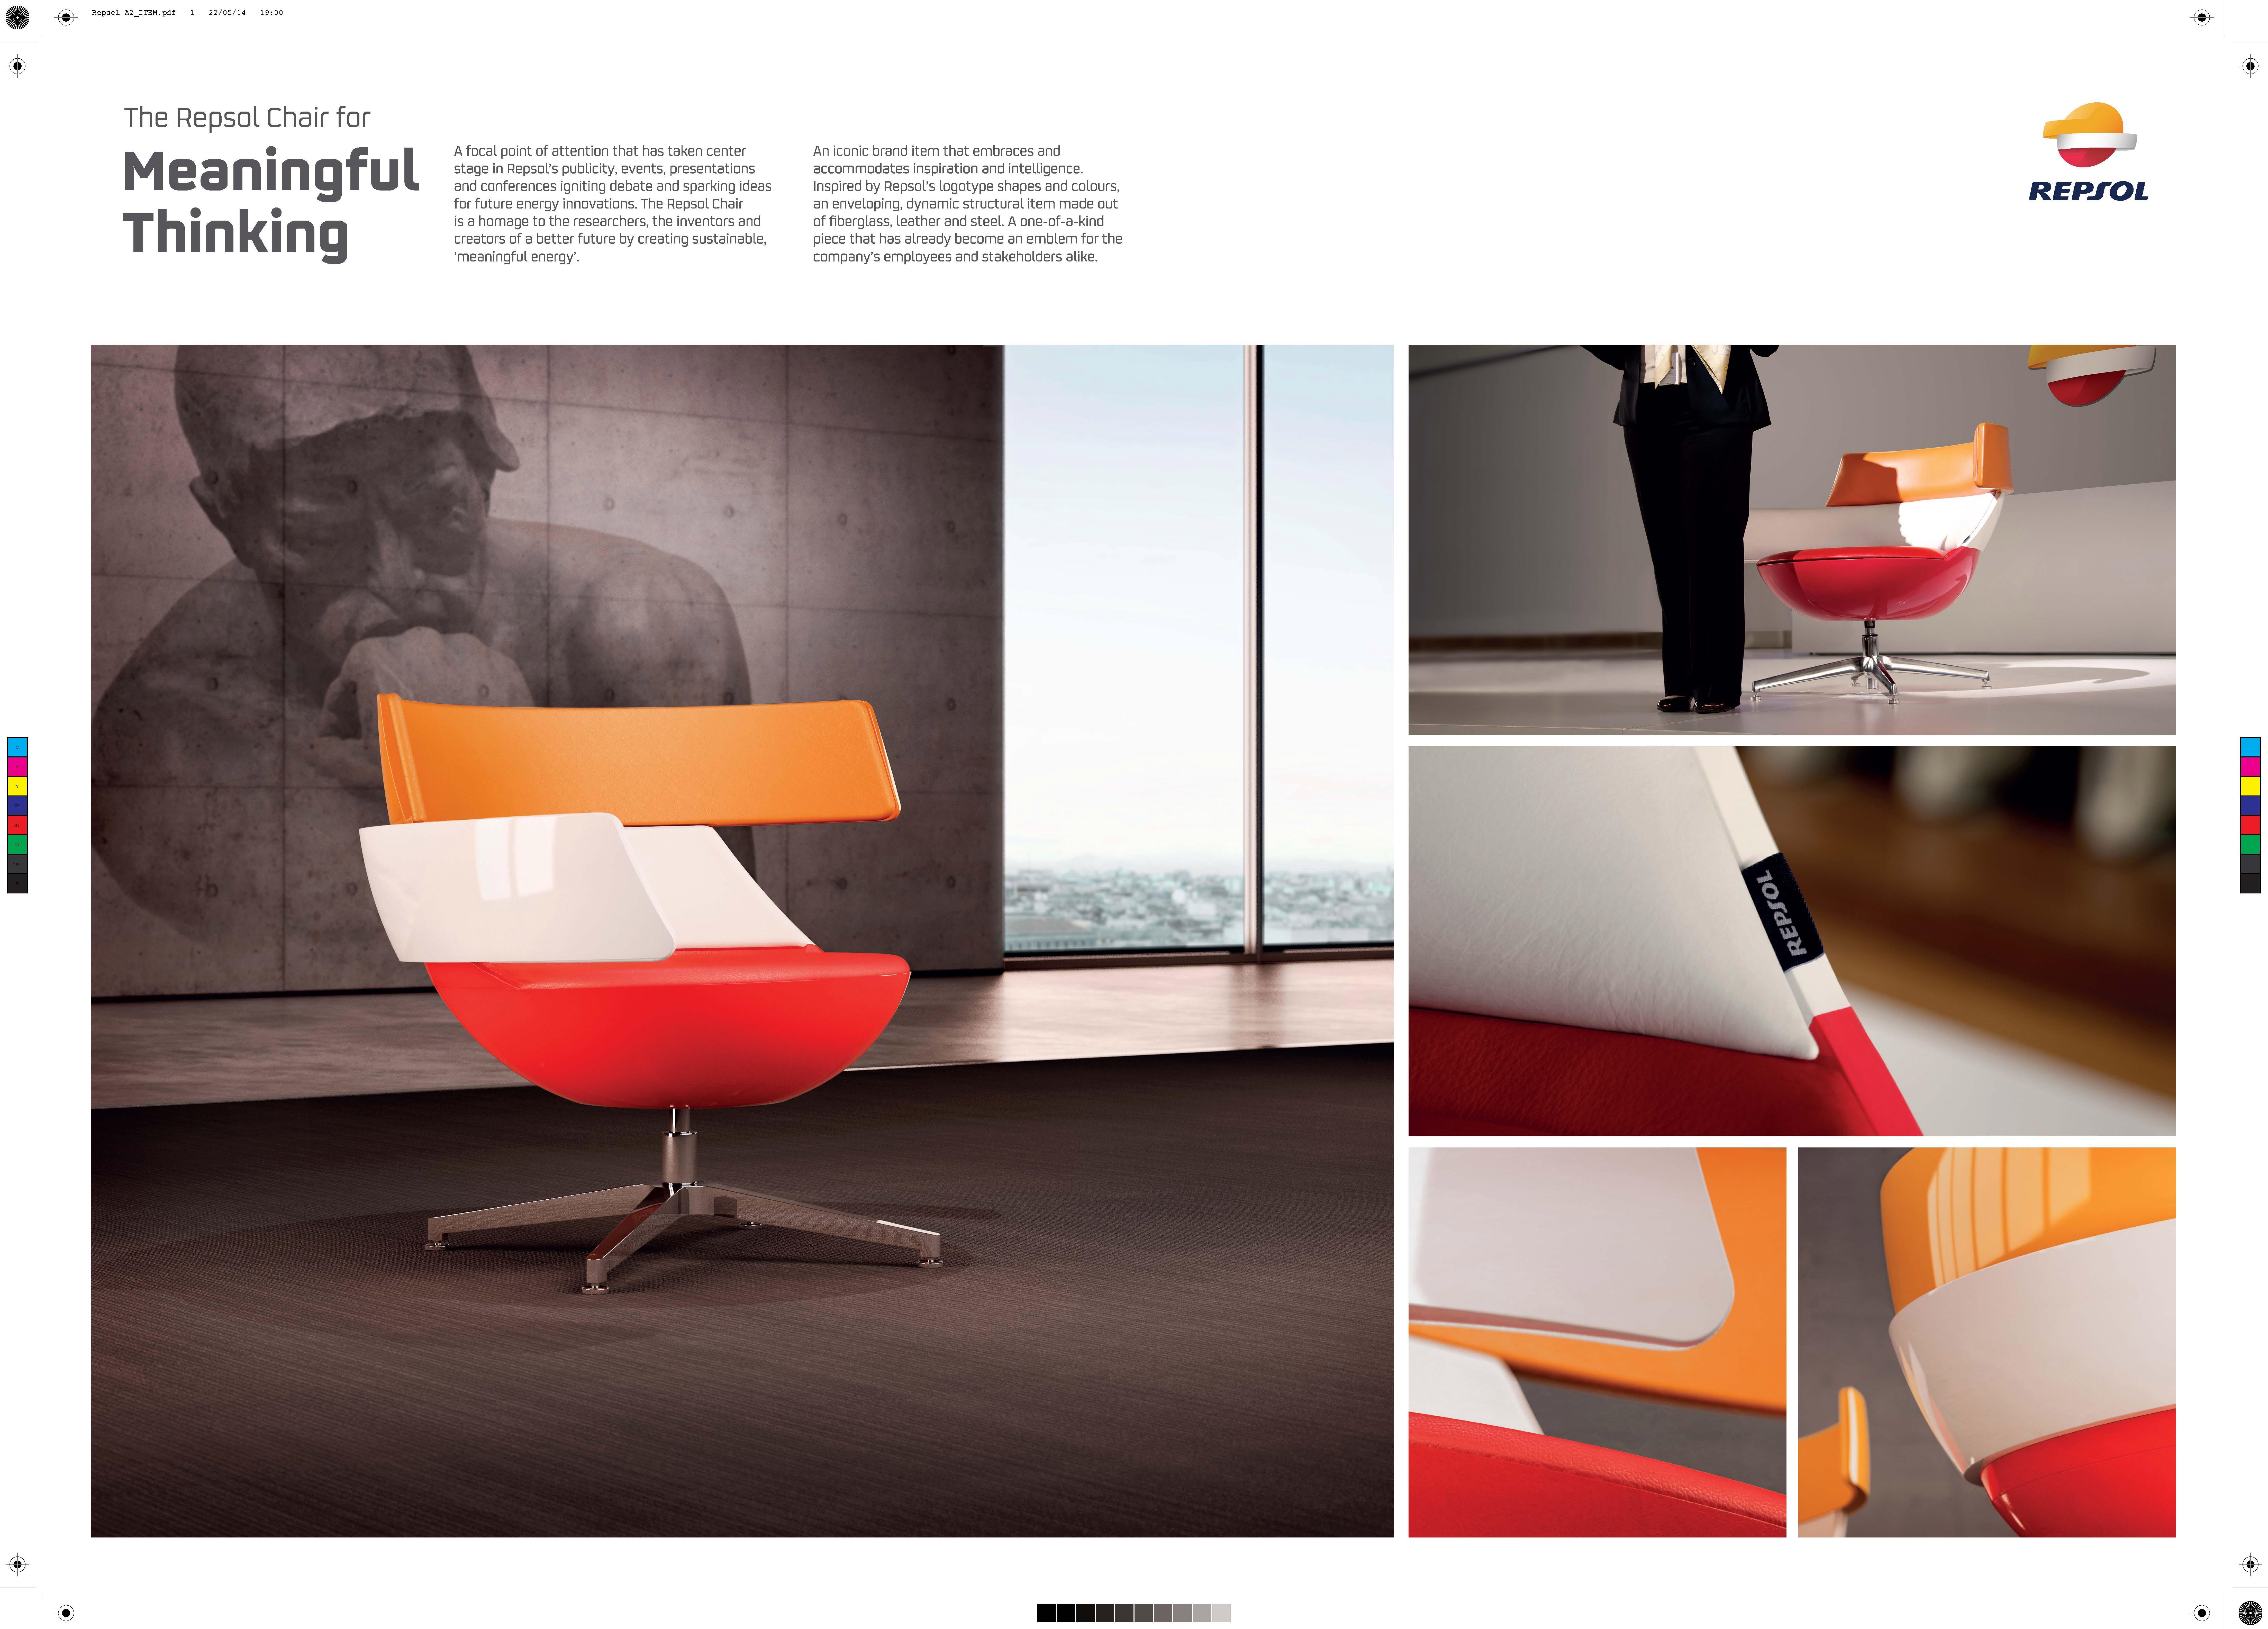 “THE REPSOL CHAIR (FOR MEANINGFUL THINKING)”